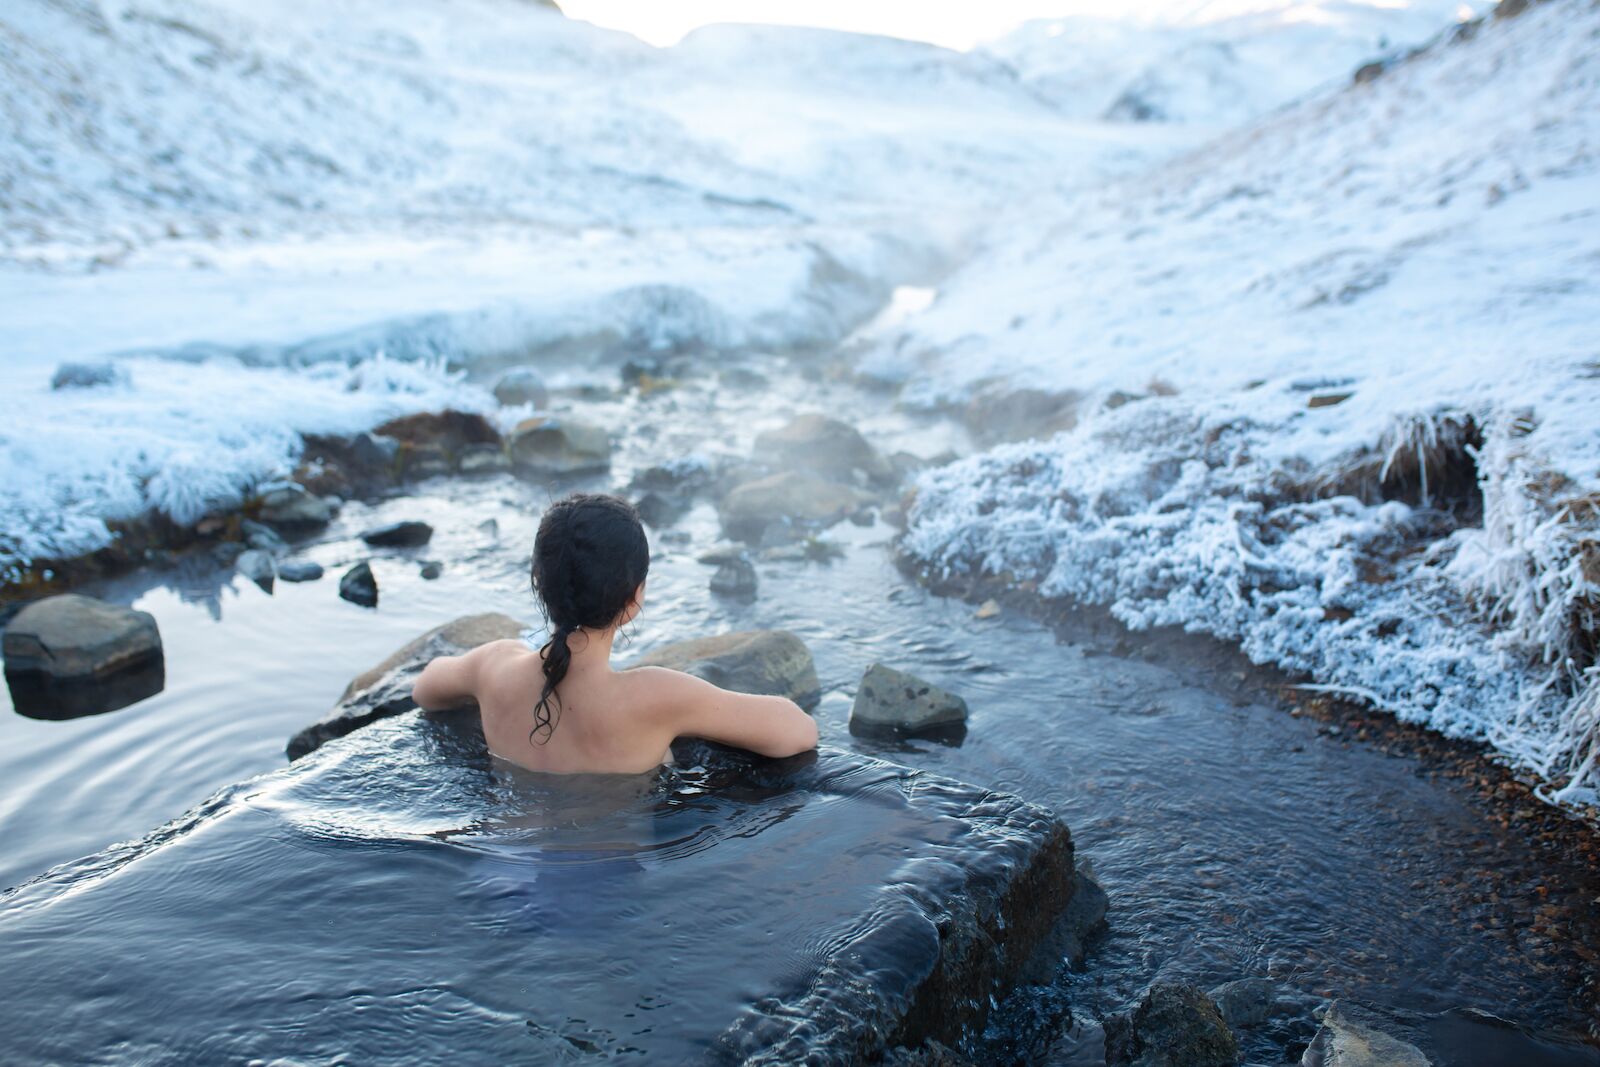 Person naked enjoying the warm waters of a hot spring in Iceland with views of snowy mountains. Iceland is a great destination for Spring Break 2022.